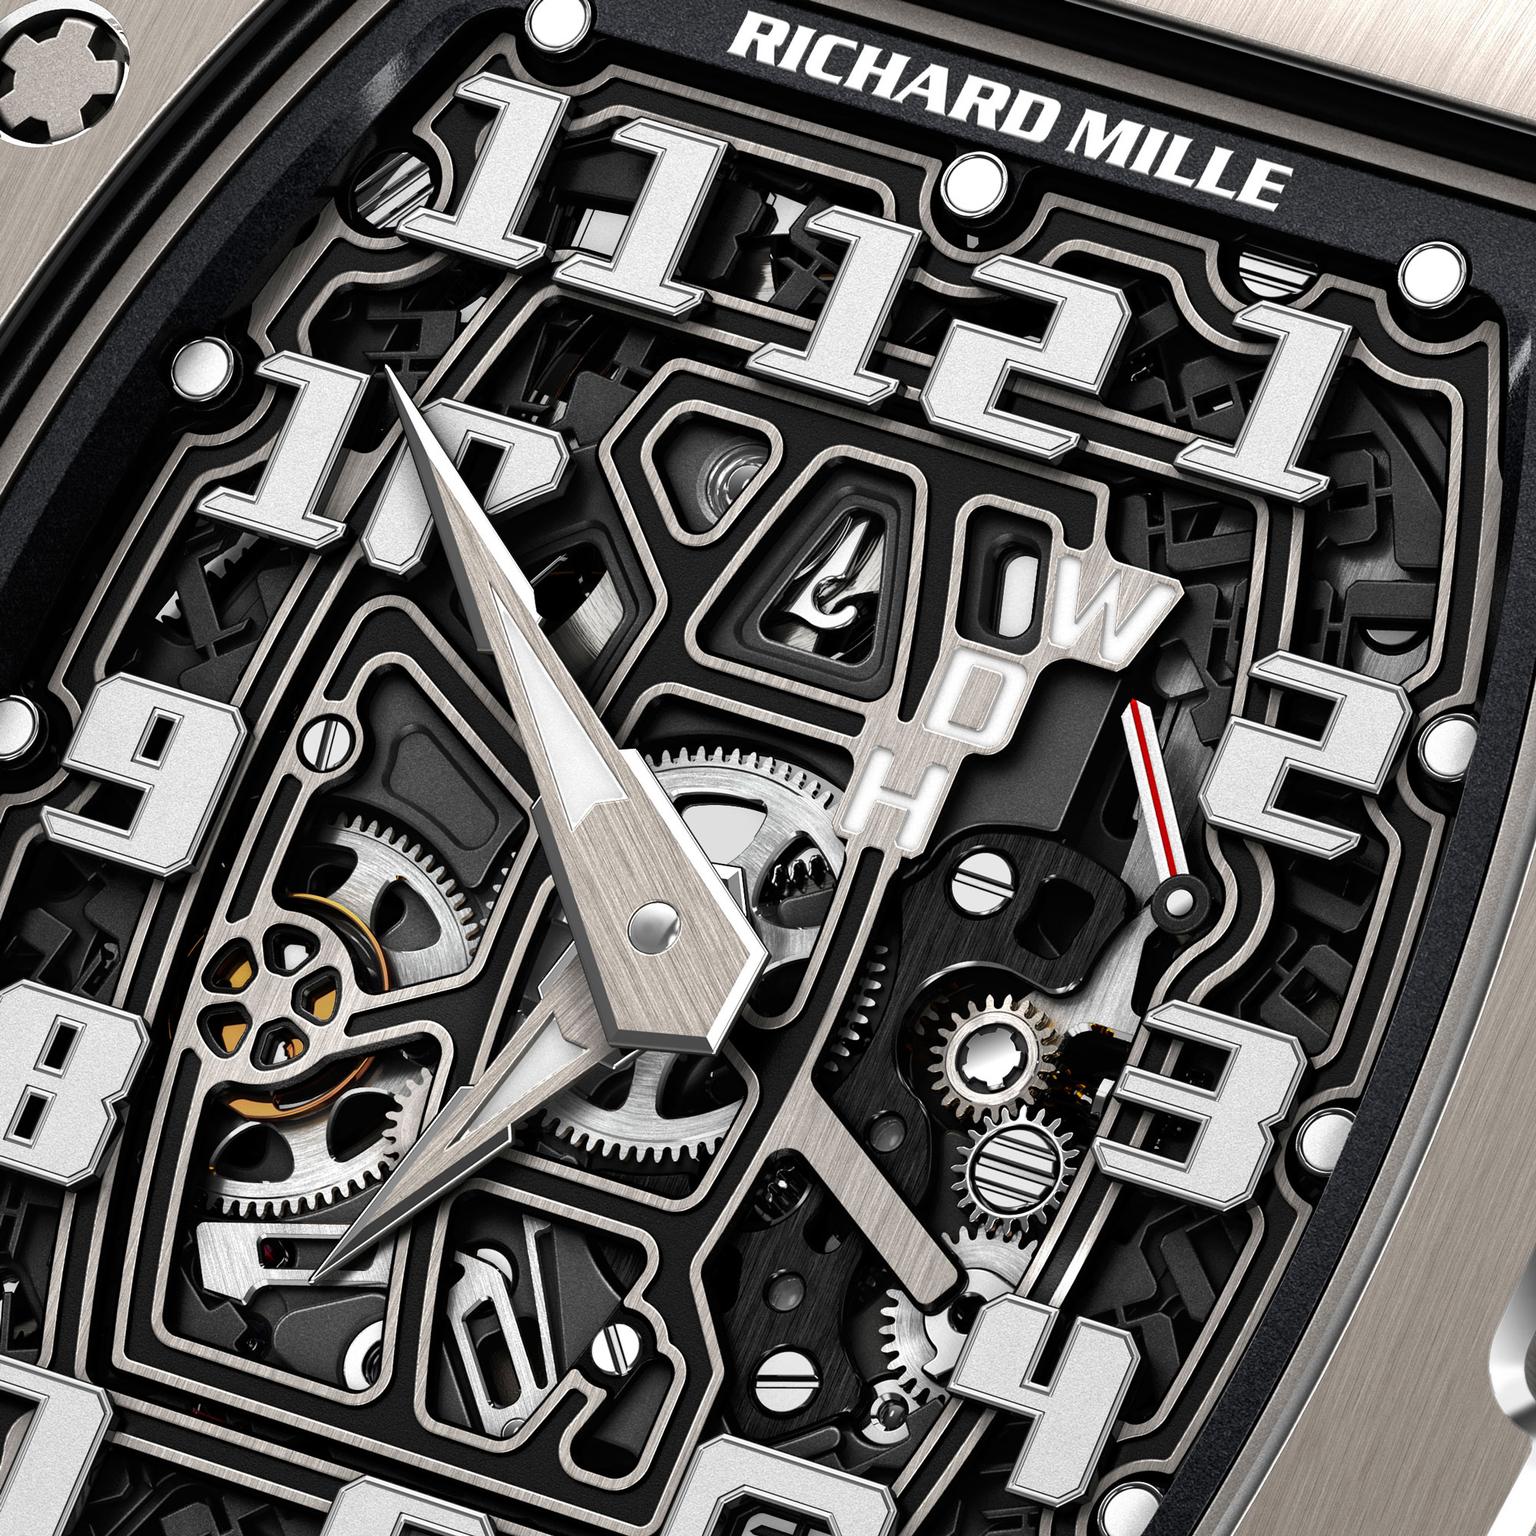 Richard Mille pre-SIHH Extra Flat watch